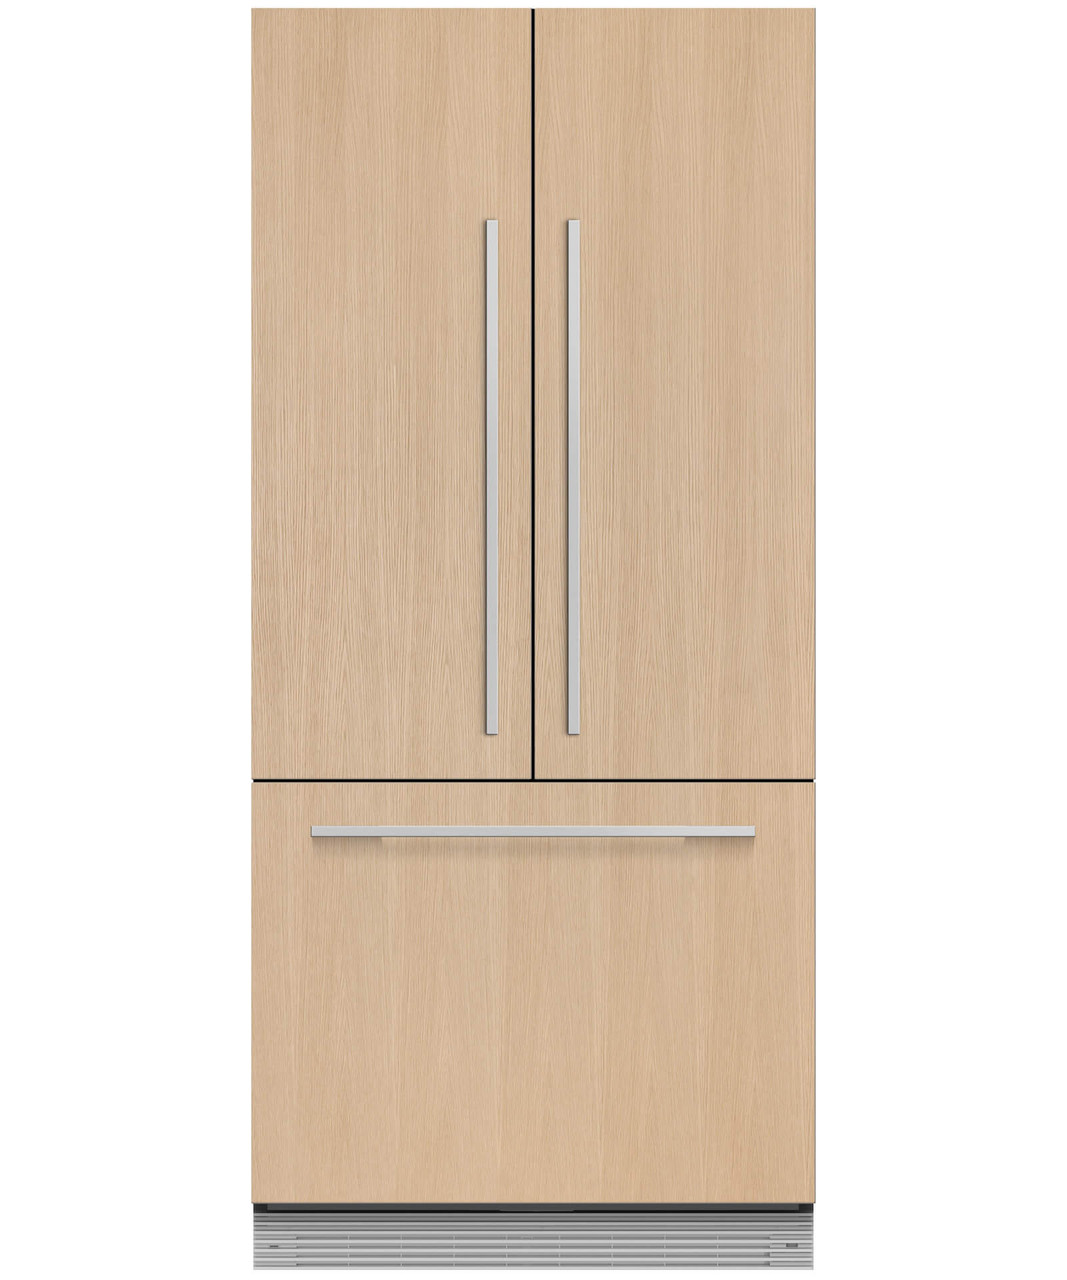 RS80A1 - 455L Integrated French Door Refrigerator, 800mm